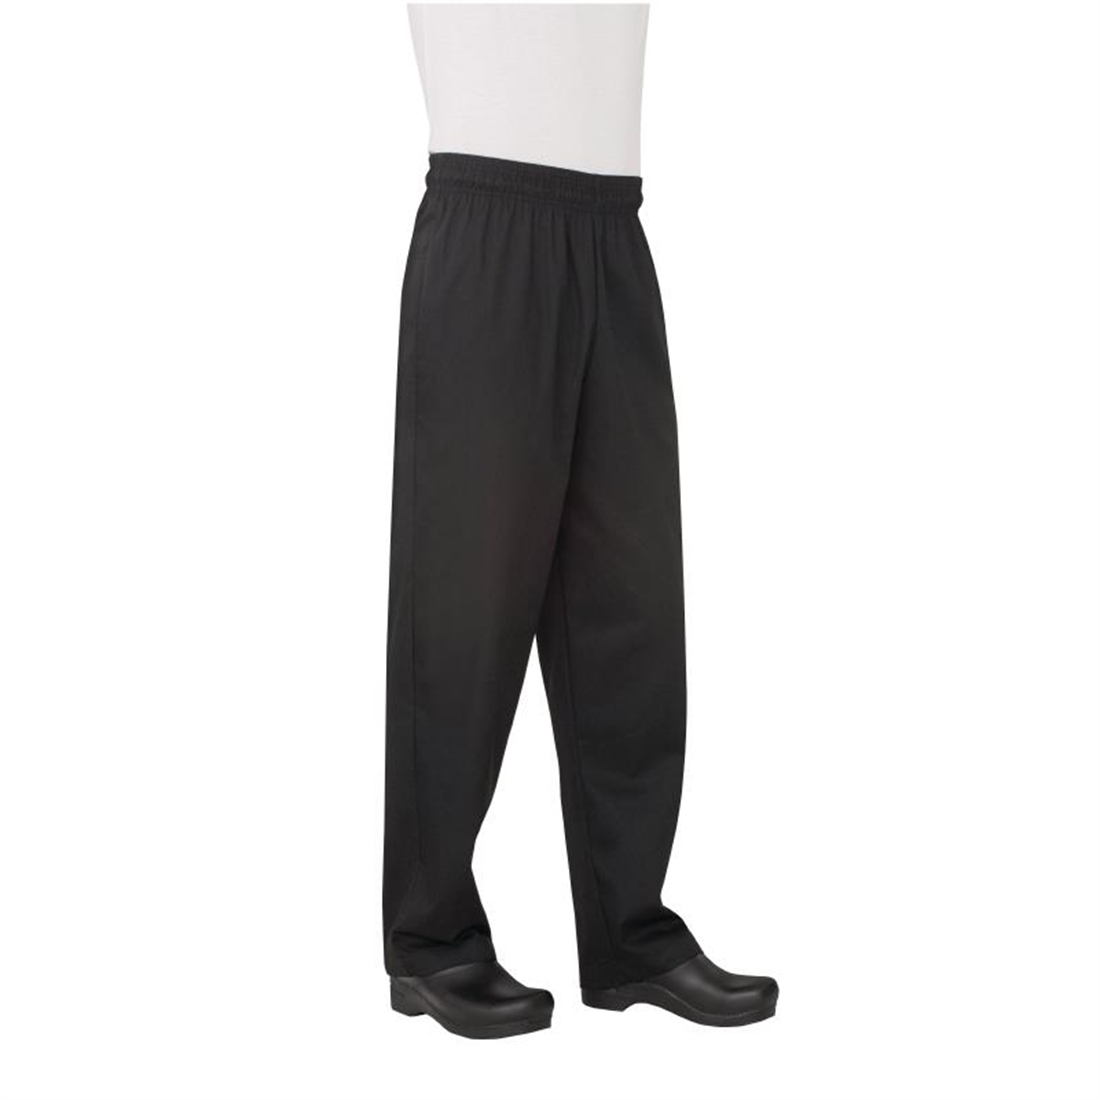 Chef Works Unisex Basic Baggy Chefs Trousers Black 5XL